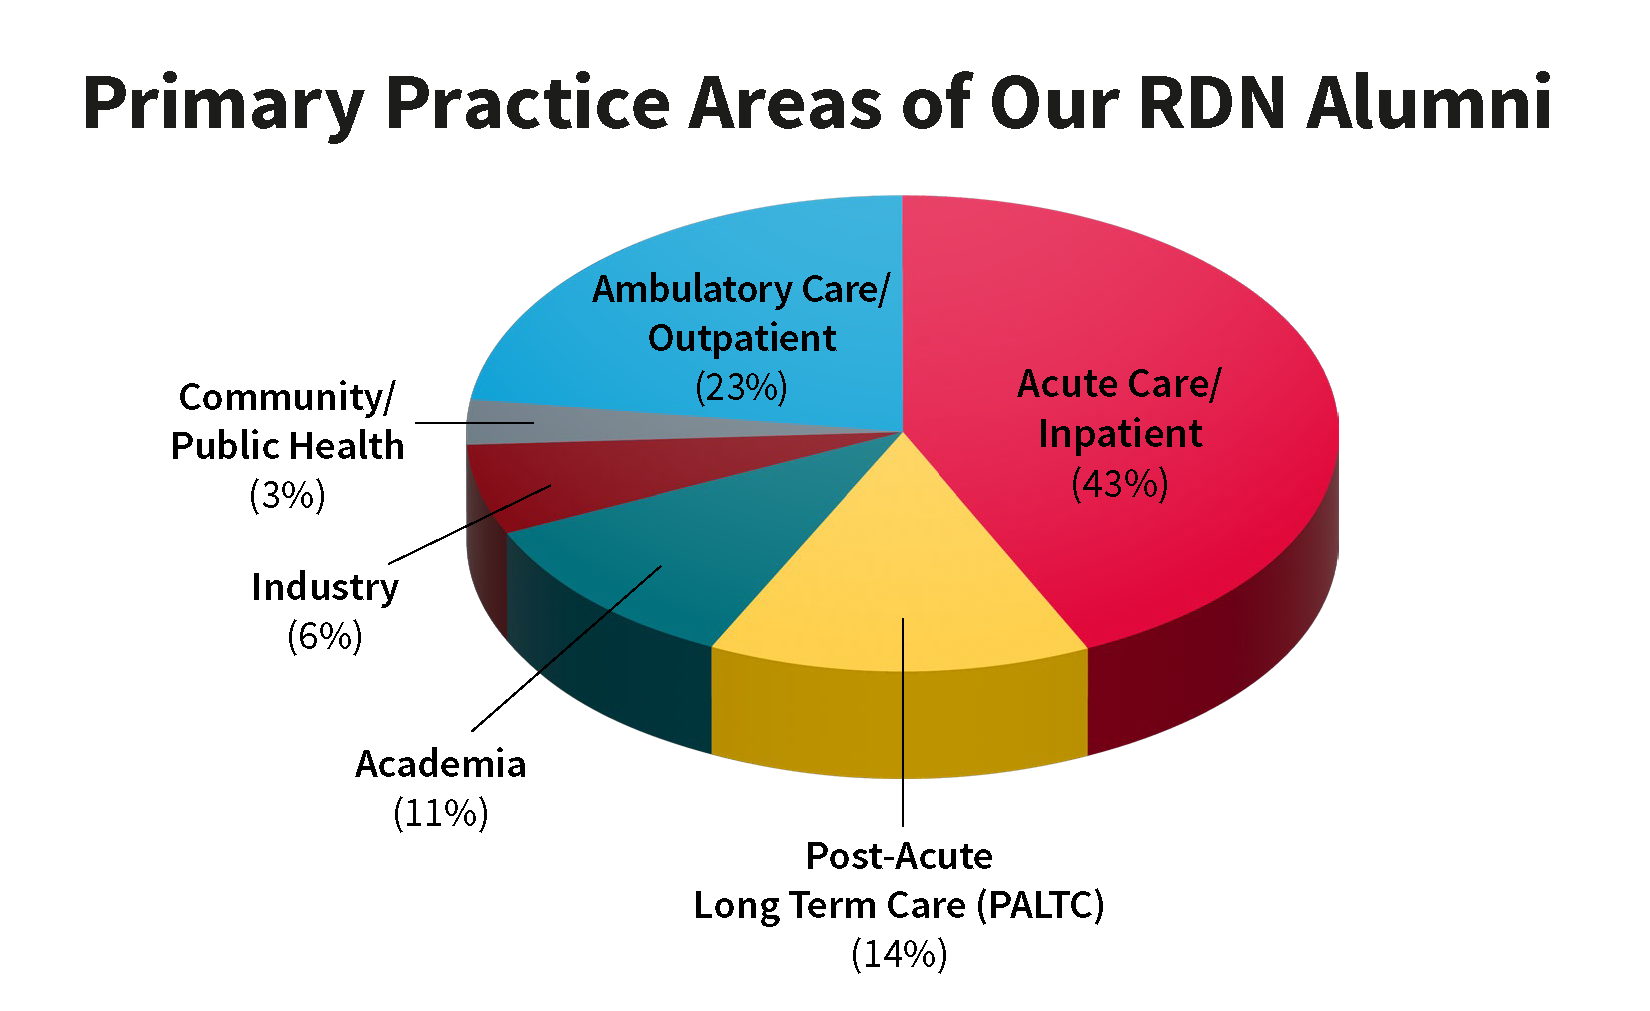 Primary Practice Areas of our RDN Alumni